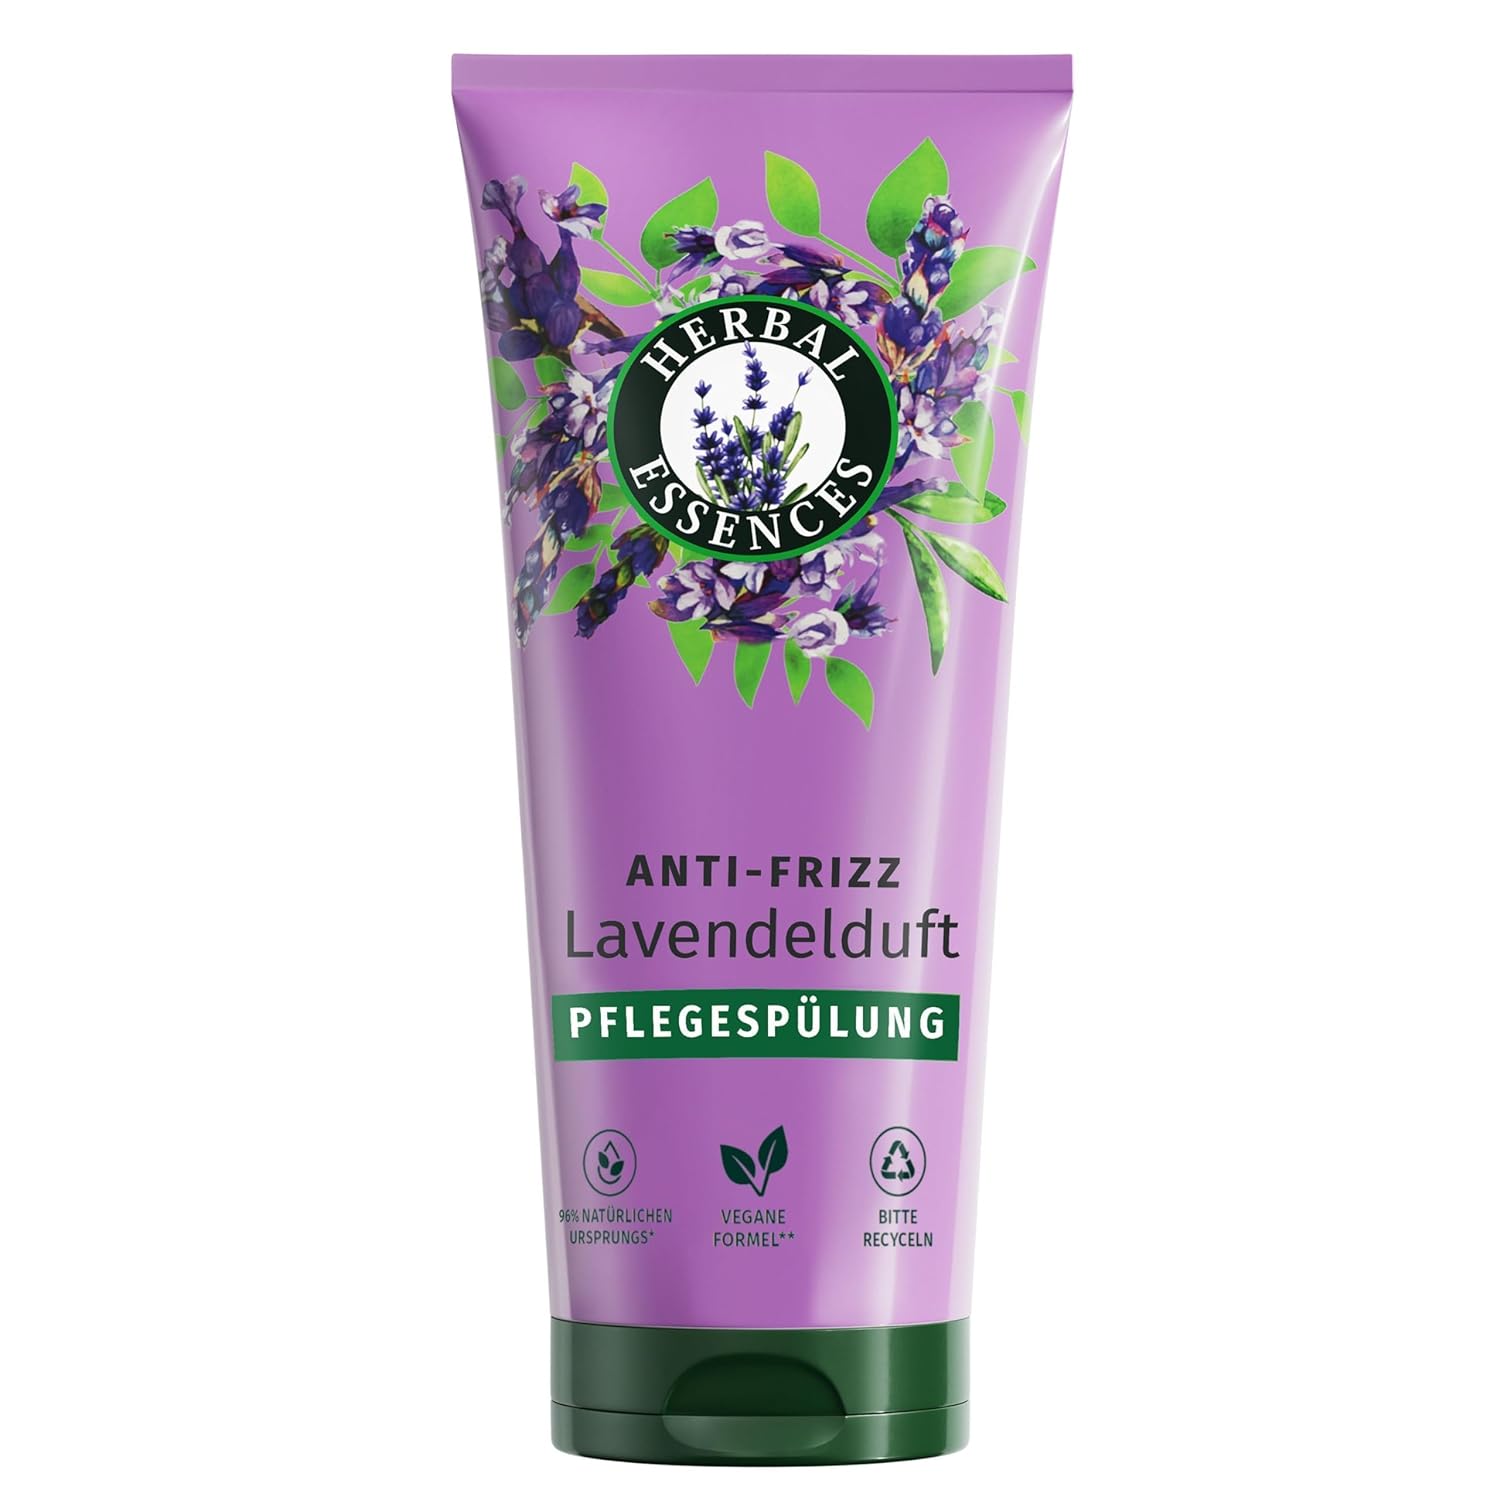 Herbal Essences Gentle Cleansing Conditioner with Lavender Fragrance 250 ml From Frizz, Brittle Hair to Gentle Hair without Frizz, with Ingredients of Natural Origin, Vegan